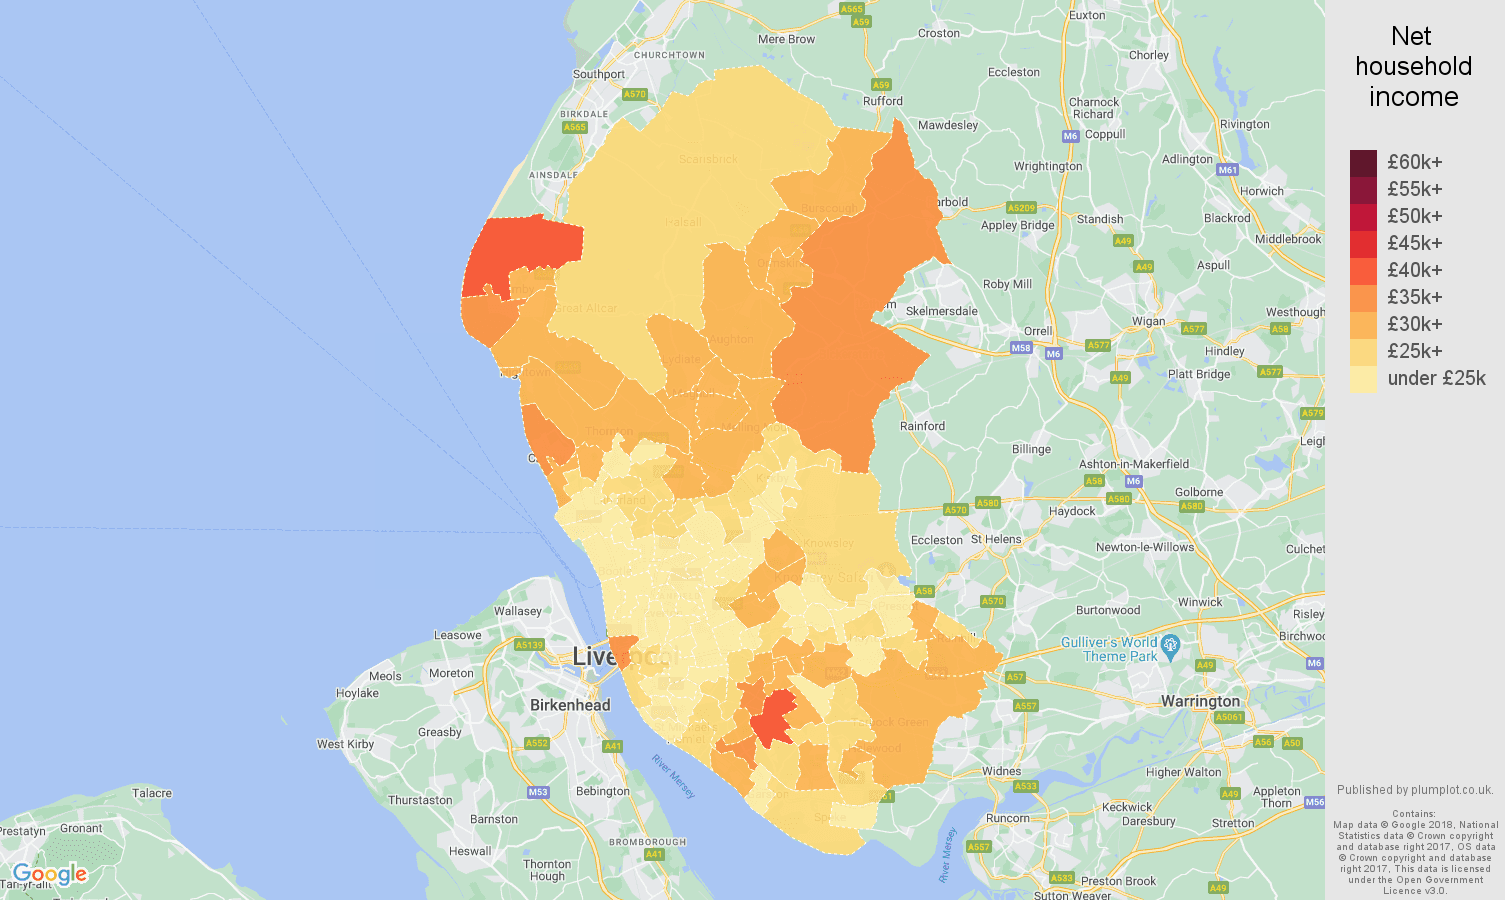 Liverpool net household income map